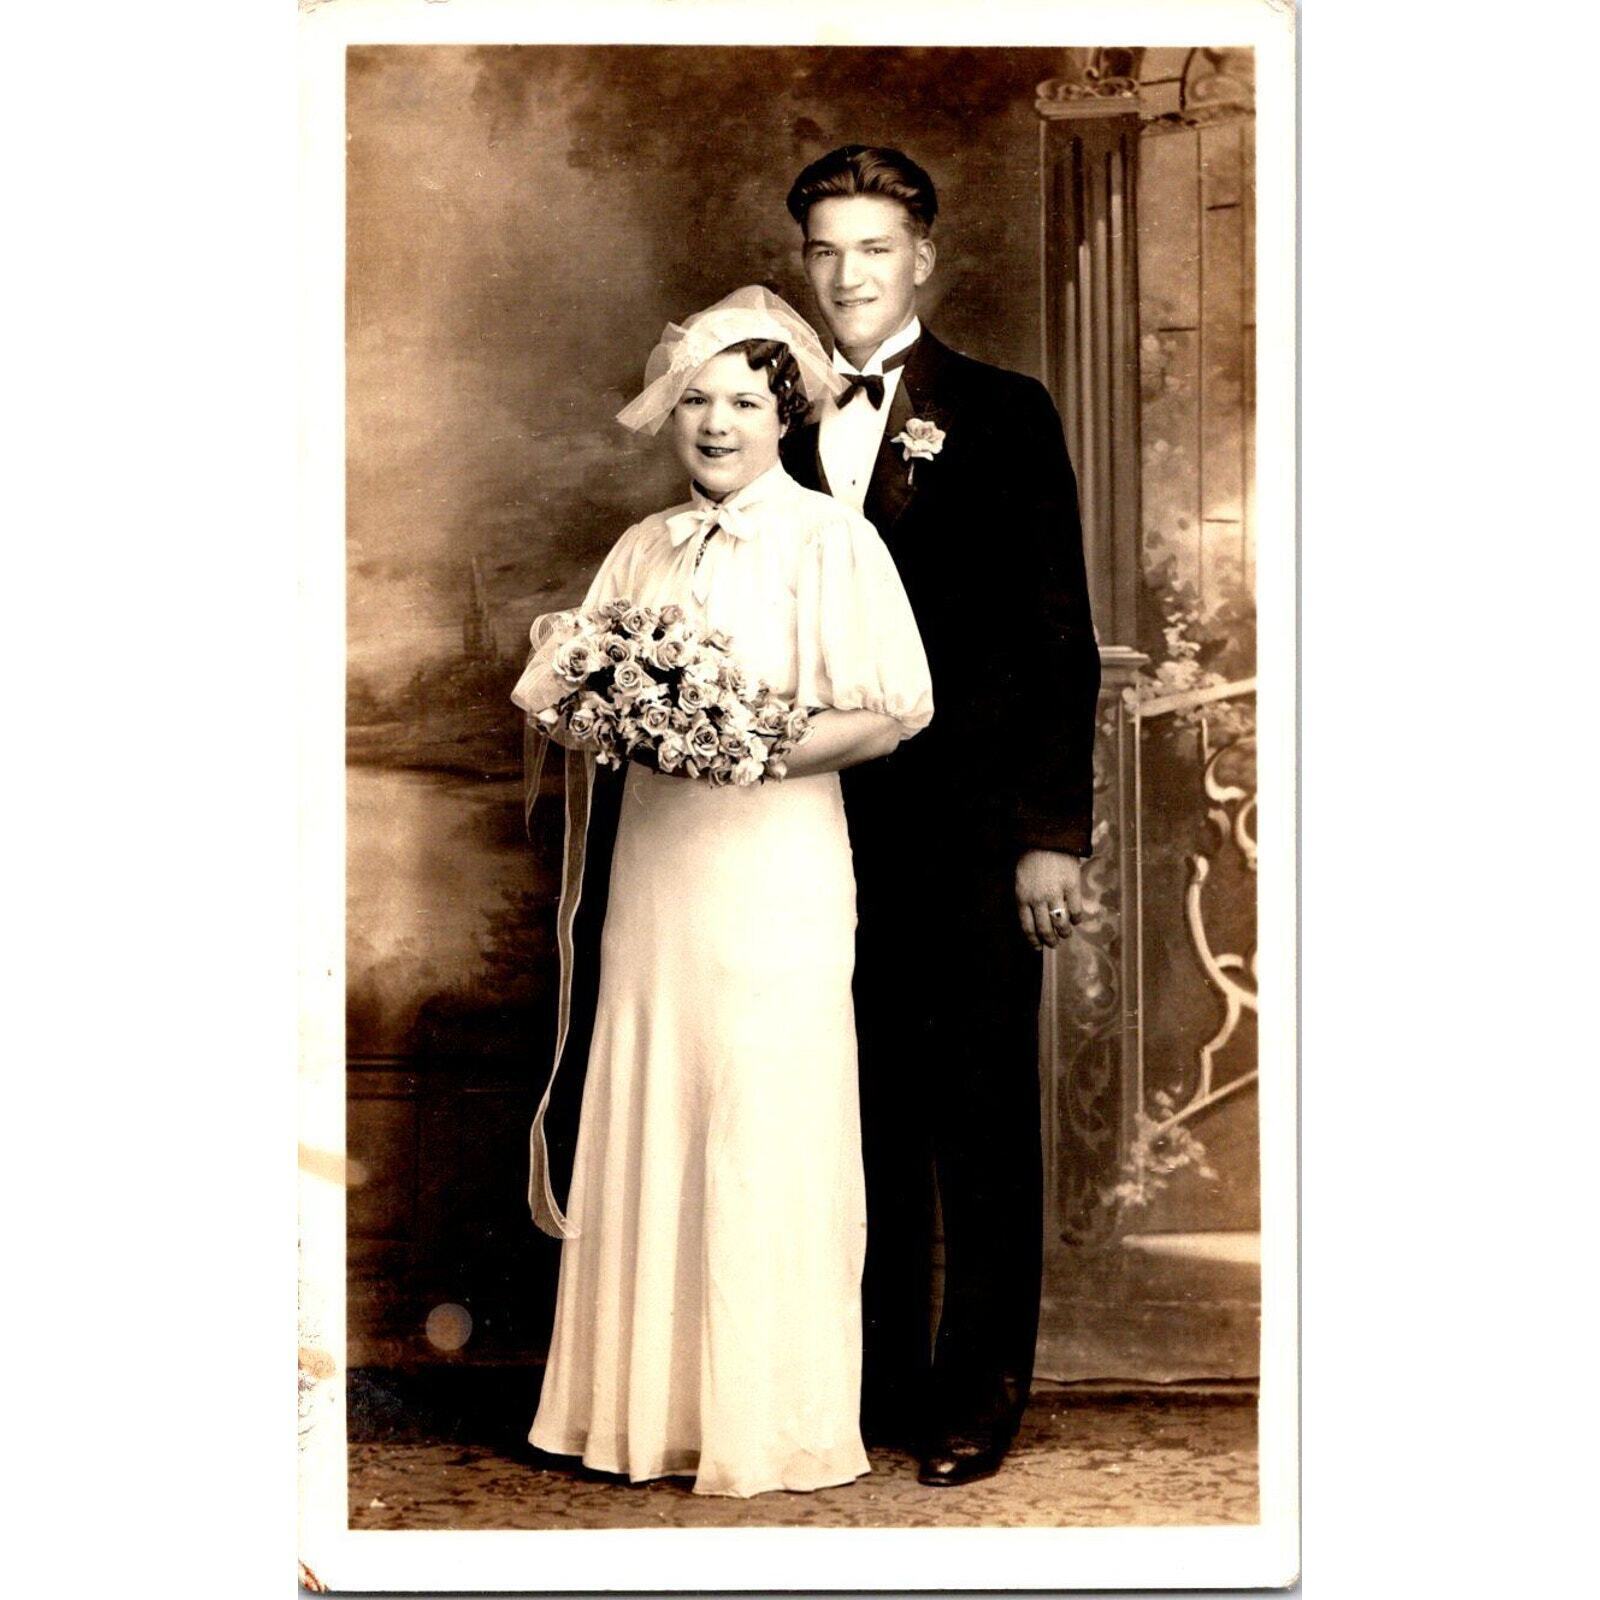 Vintage Postcard RPPC Wedding Photo Young Couple with Bridal Bouquet 1900s Photo